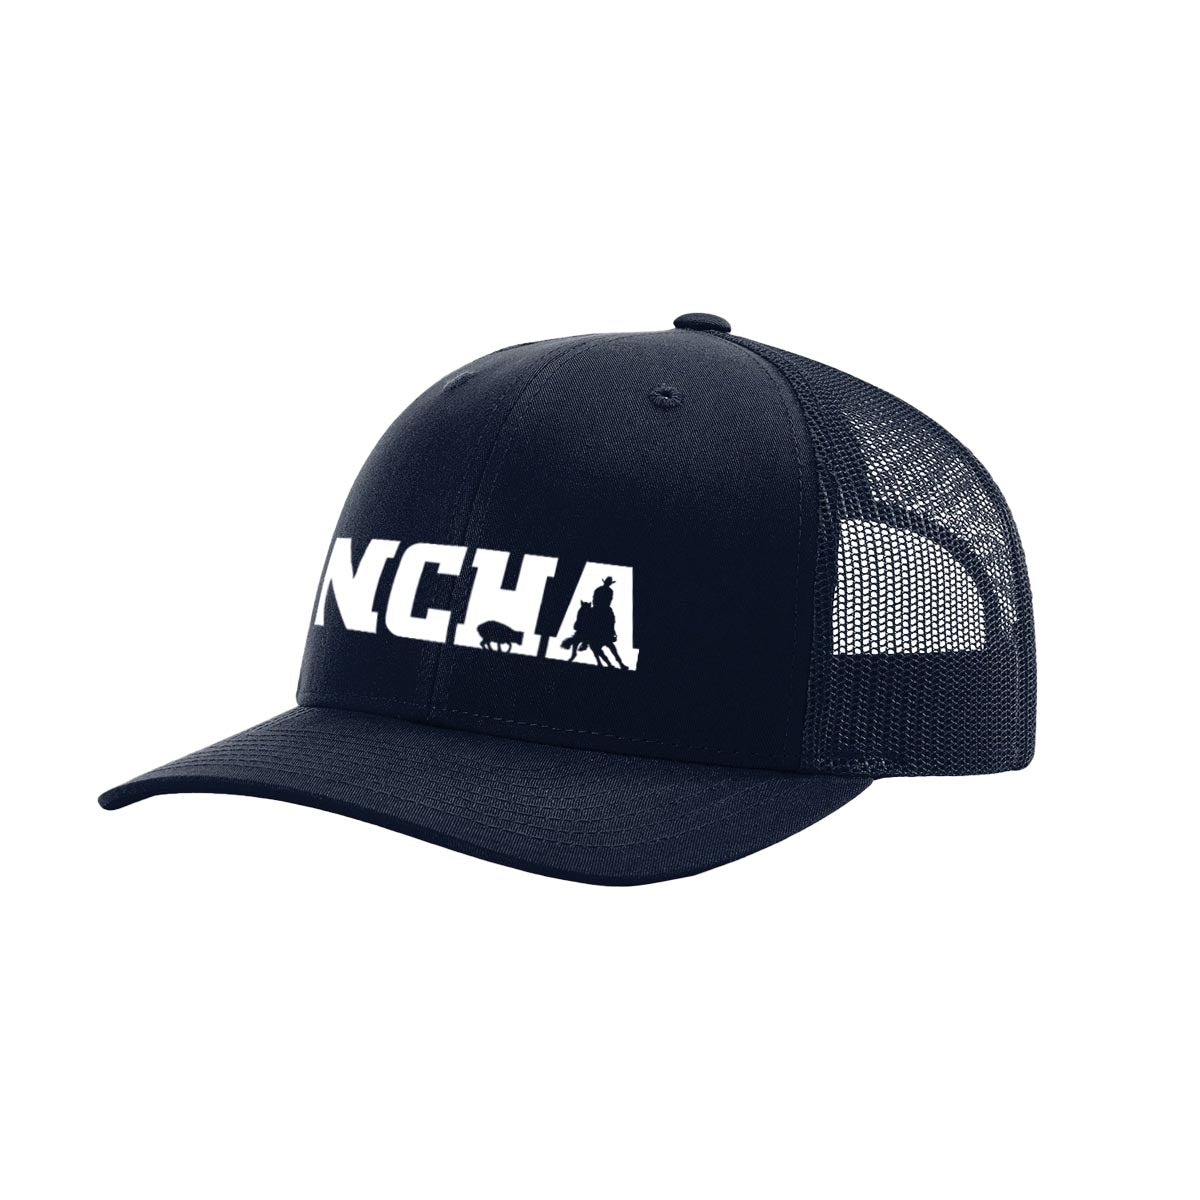 OFFICIAL NCHA HAT